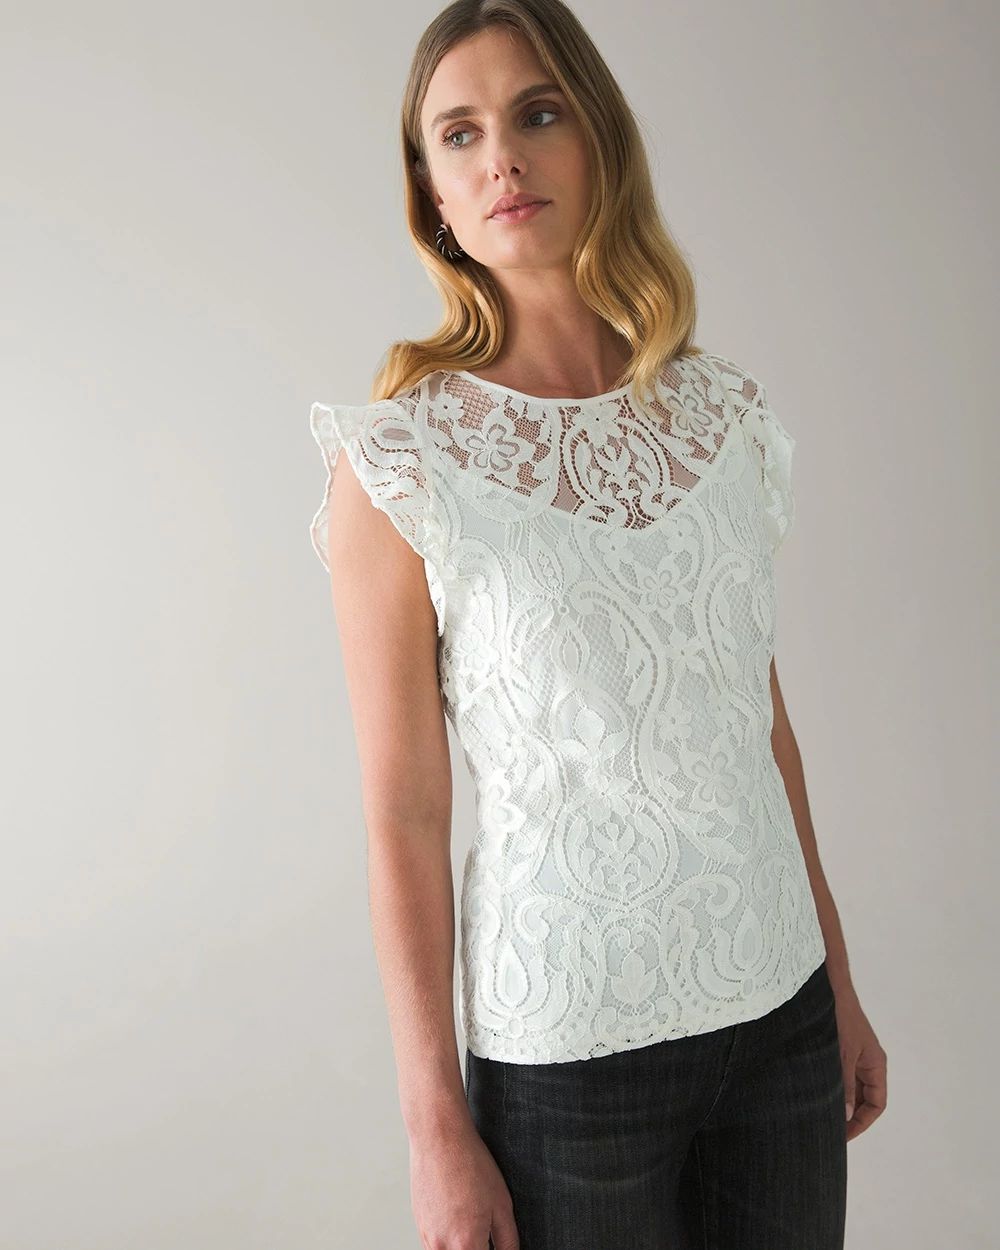 Lace Flutter Sleeve Shell click to view larger image.